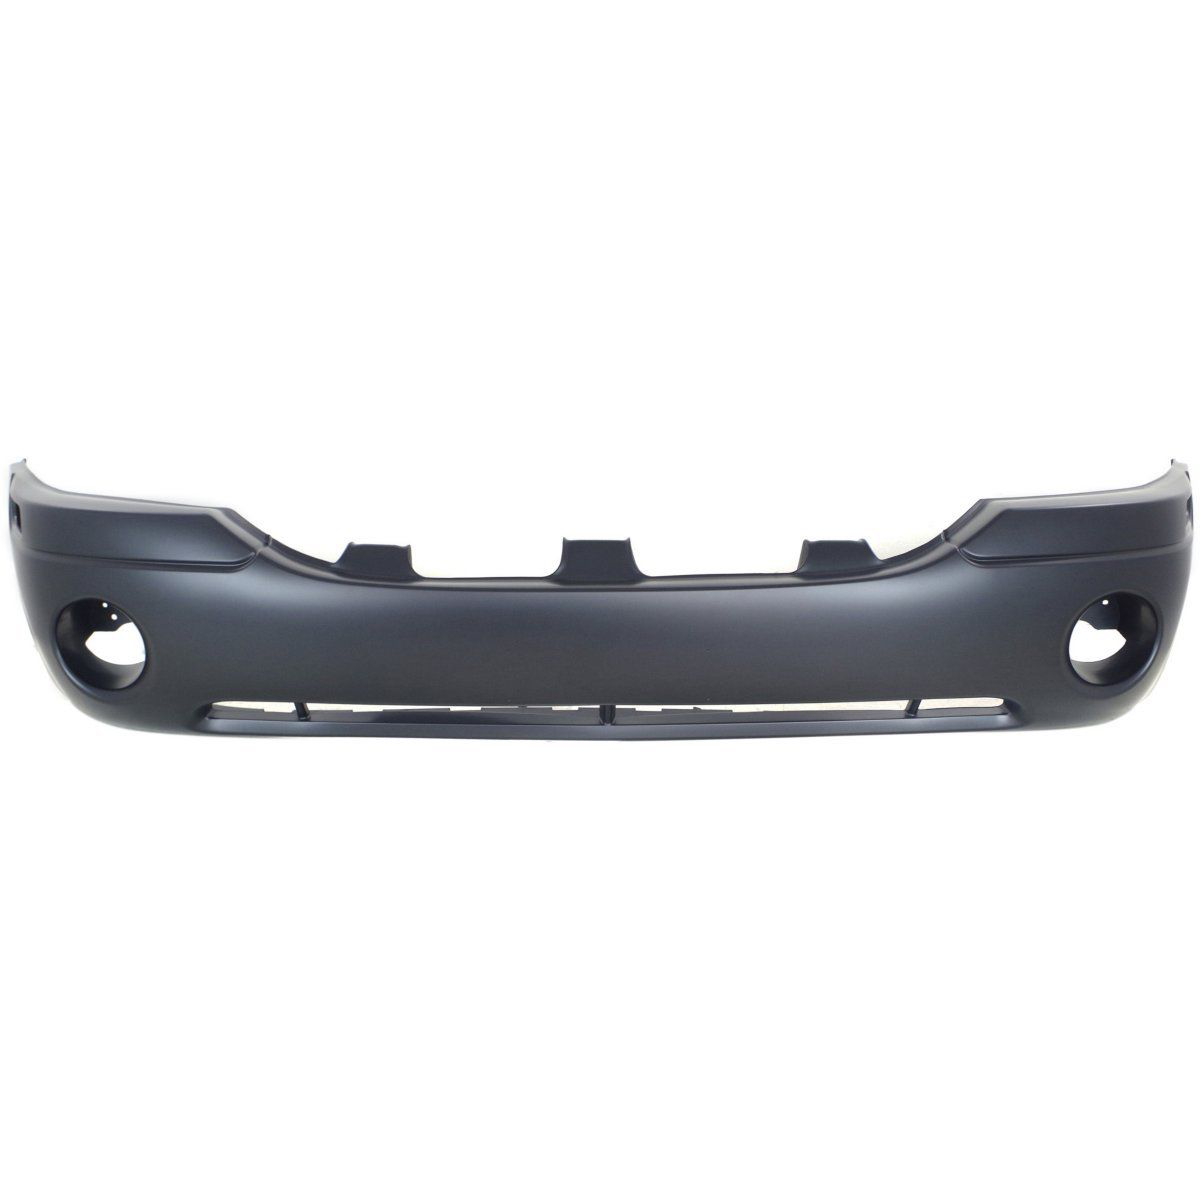 2002-2009 GMC ENVOY Rear Bumper Cover Envoy  except XUV Painted to Match